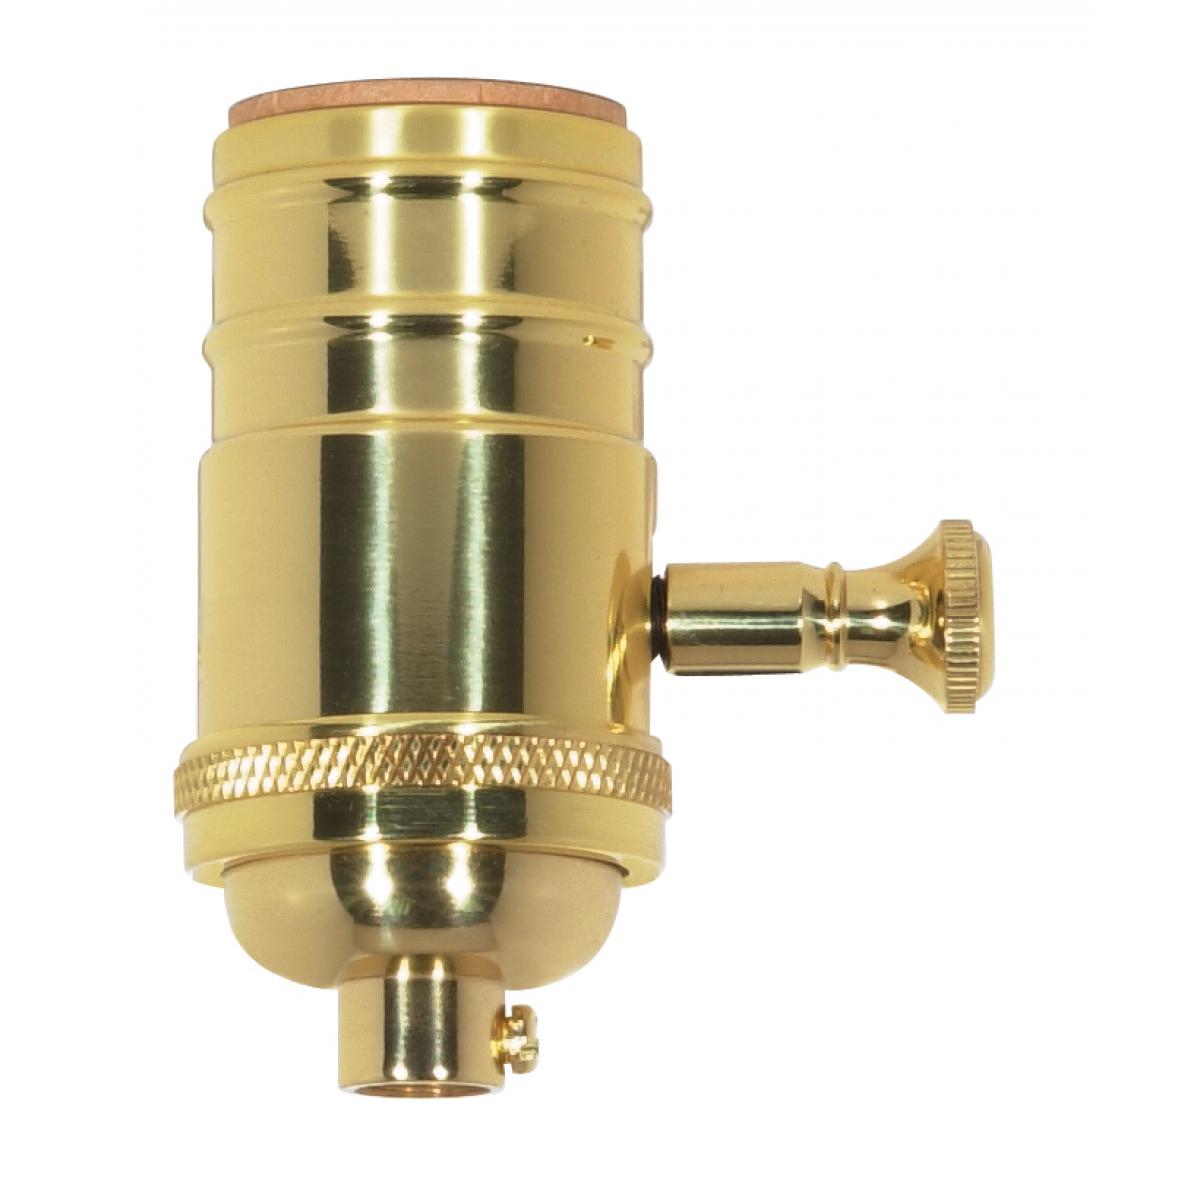 Solid Brass Dimmer Socket With Removable Knob – Polished Brass Finish